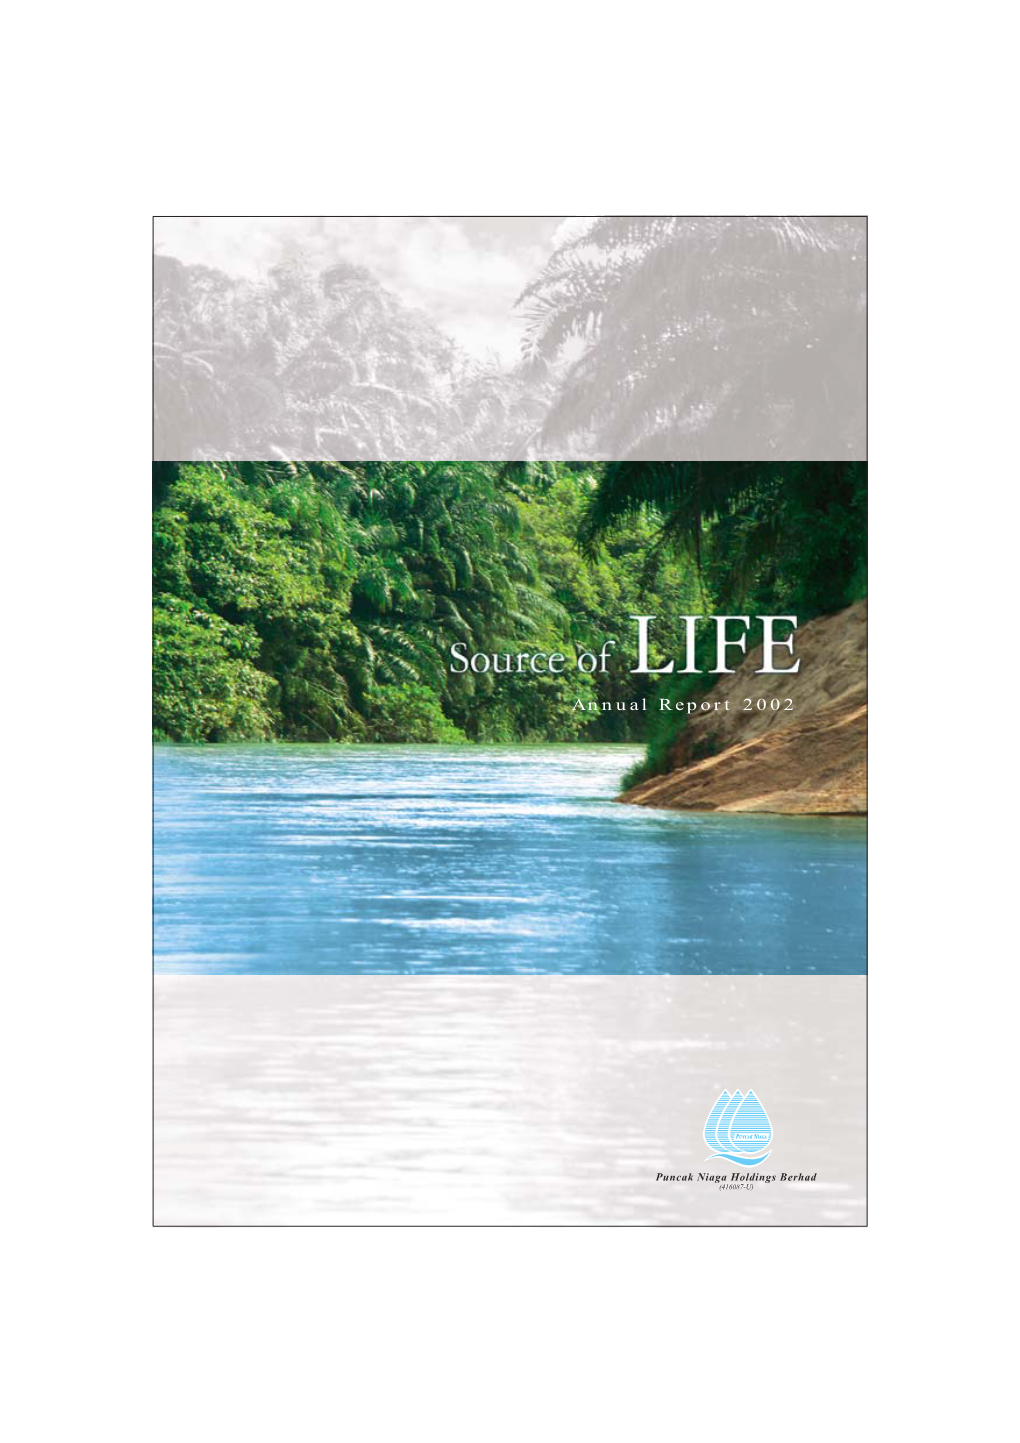 Annual Report 2002 Cover Concept "Source of LIFE"